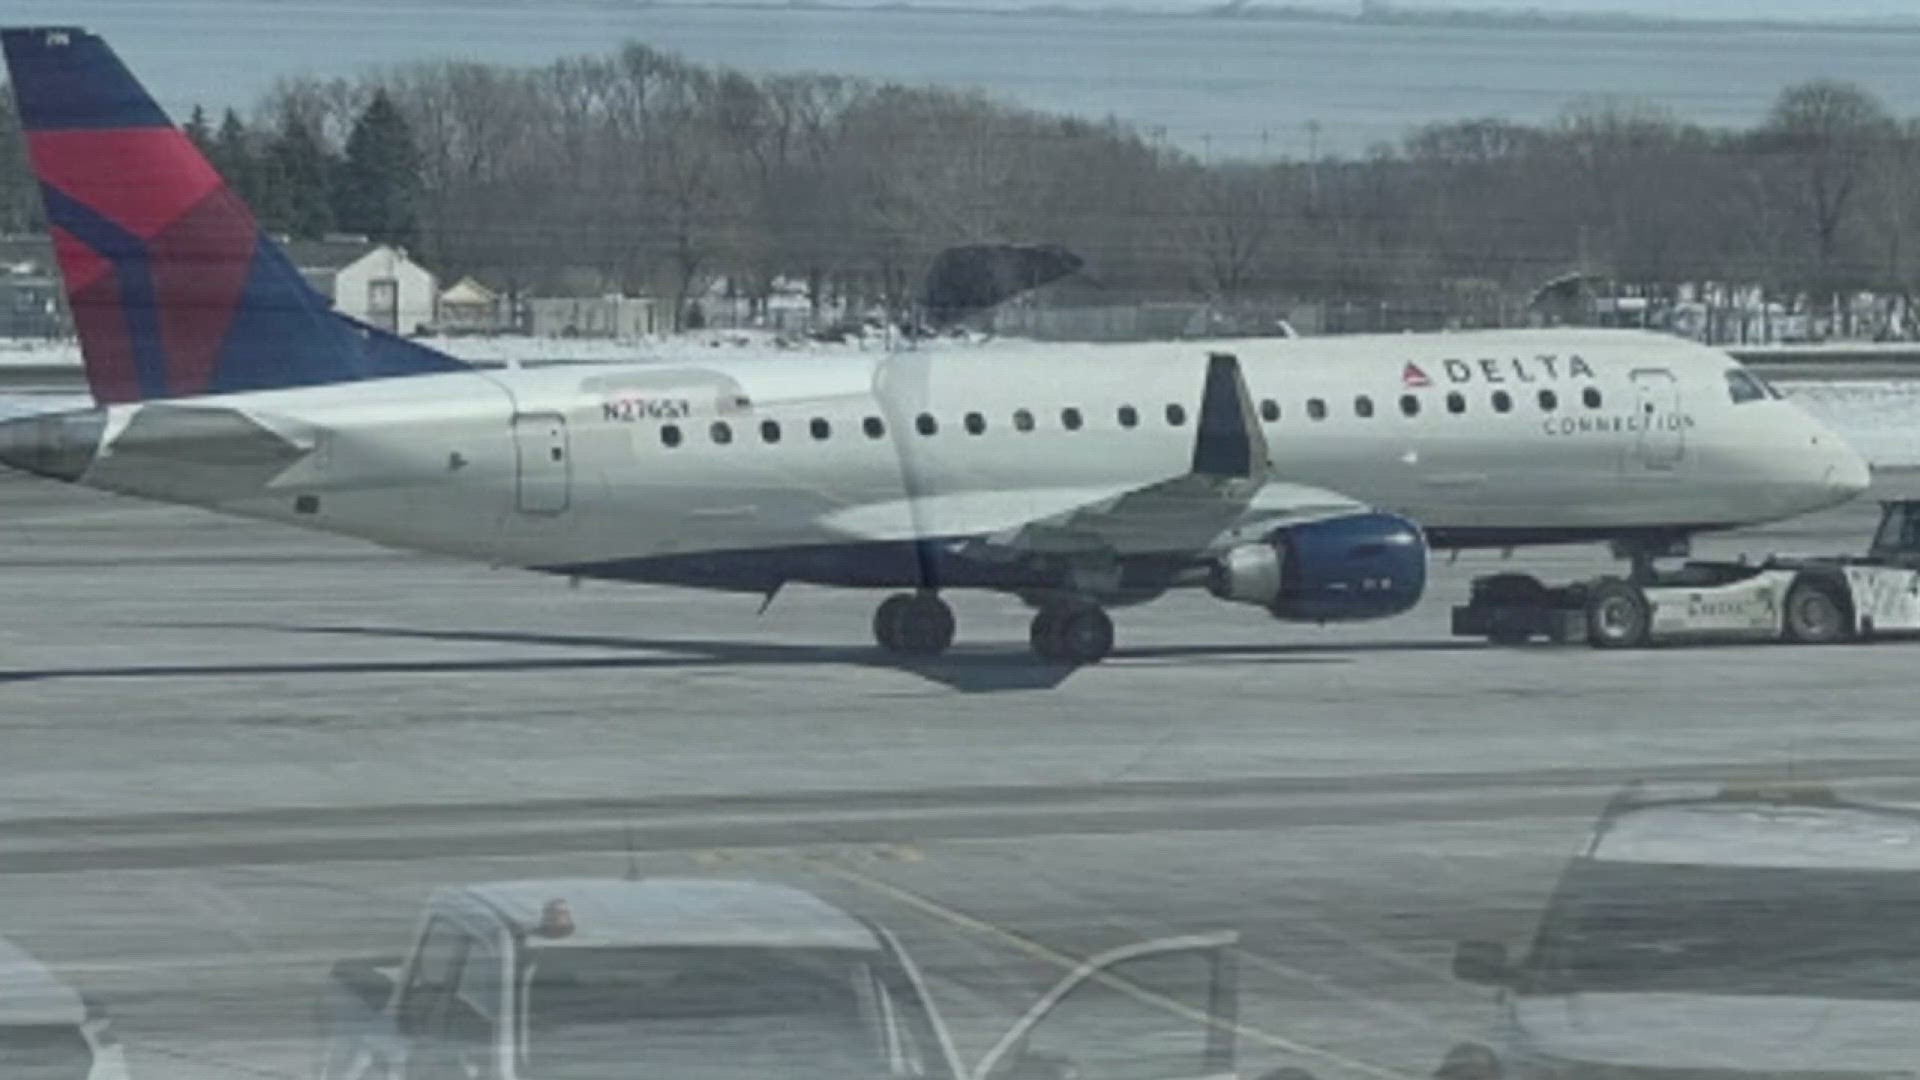 No one was injured after two Delta planes "clipped wings" on a taxiway at Minneapolis-St. Paul International Airport.